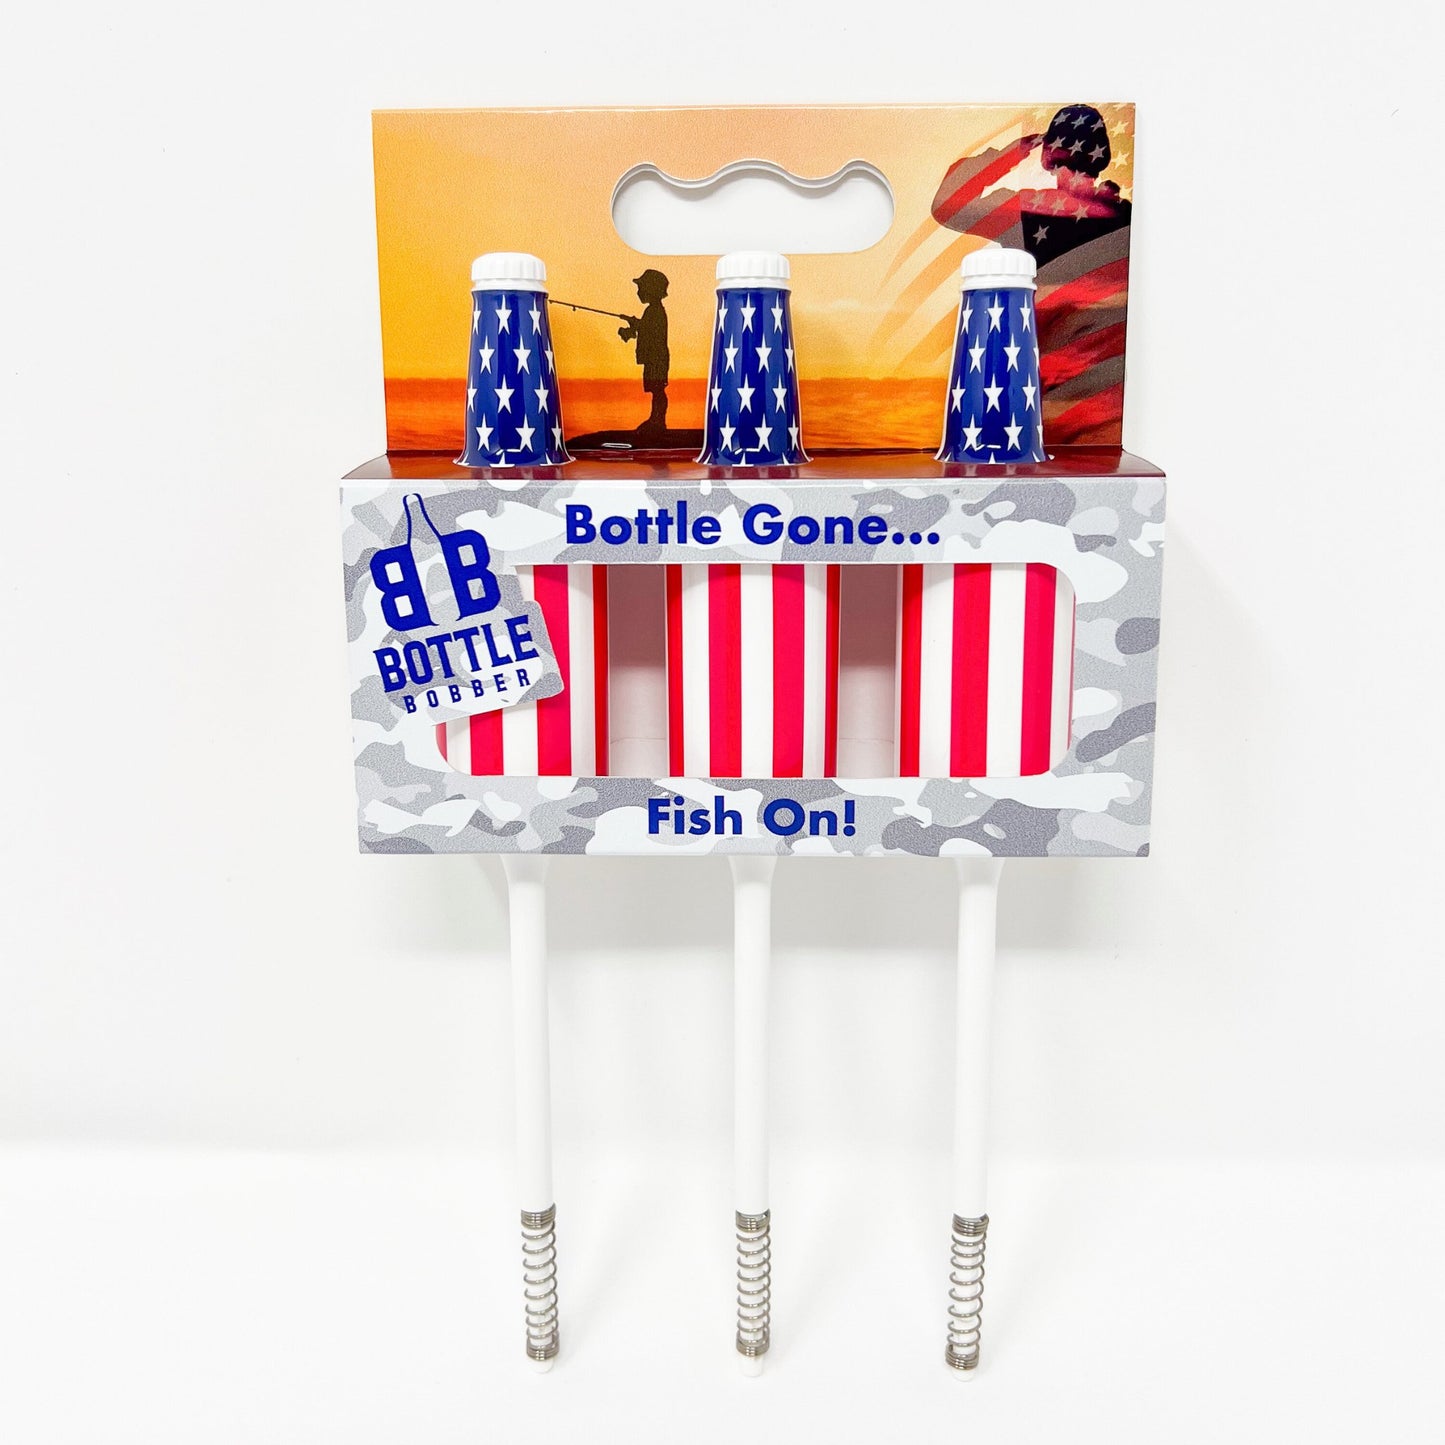 A three-pack of American Flag Prime Fish Bobbers in red, white, and blue colors